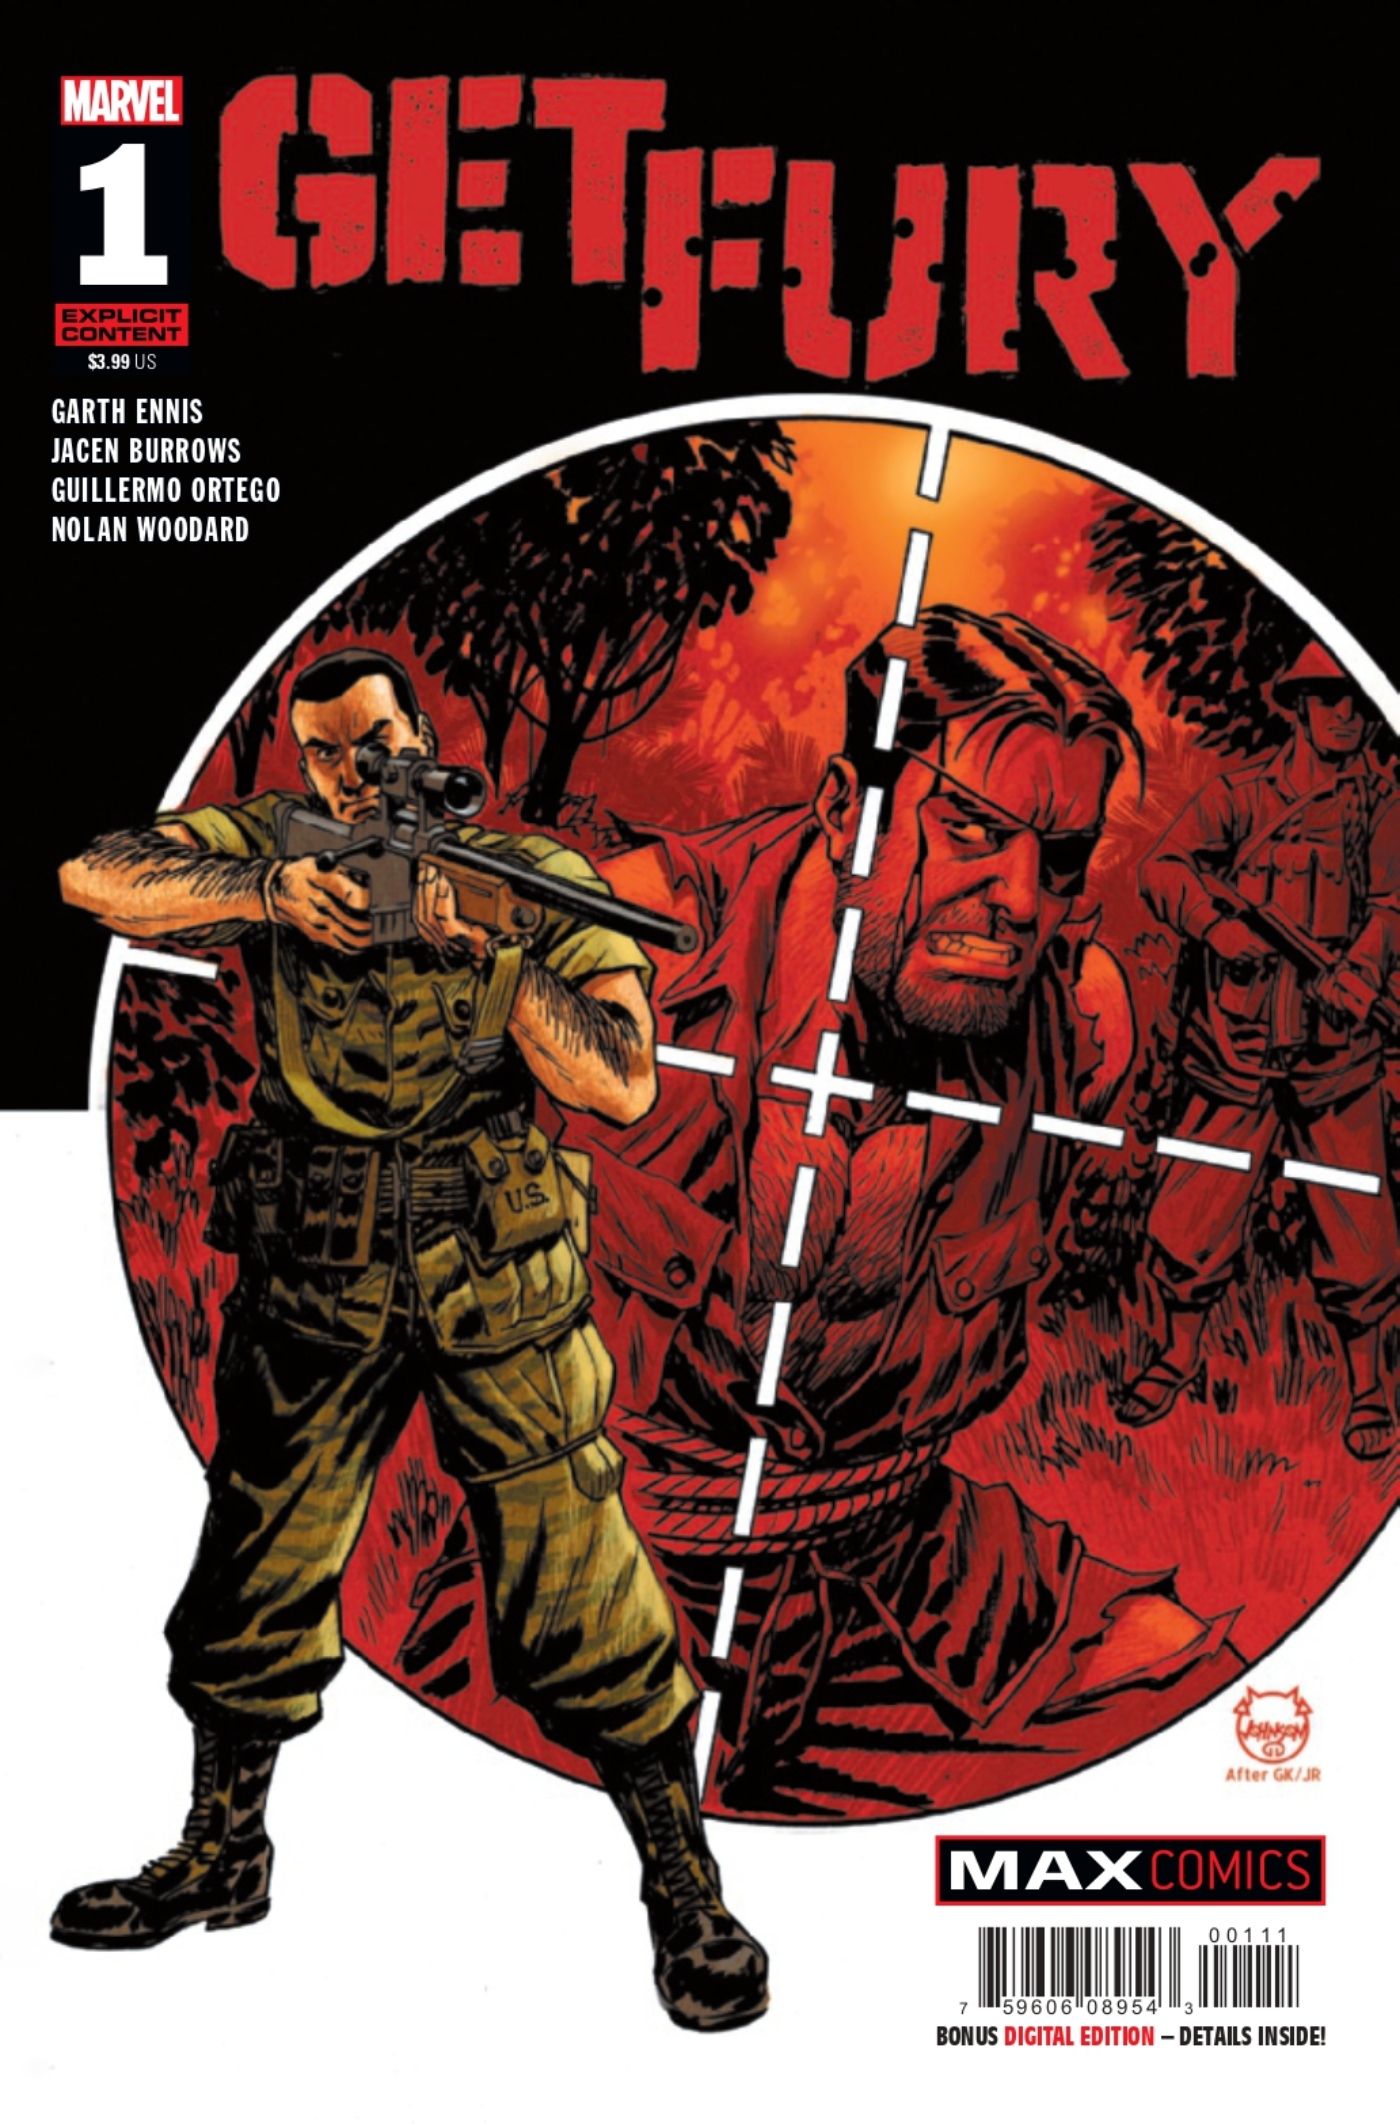 Get Fury #1 comic cover featuring the Punisher with Nick Fury in his scopes.